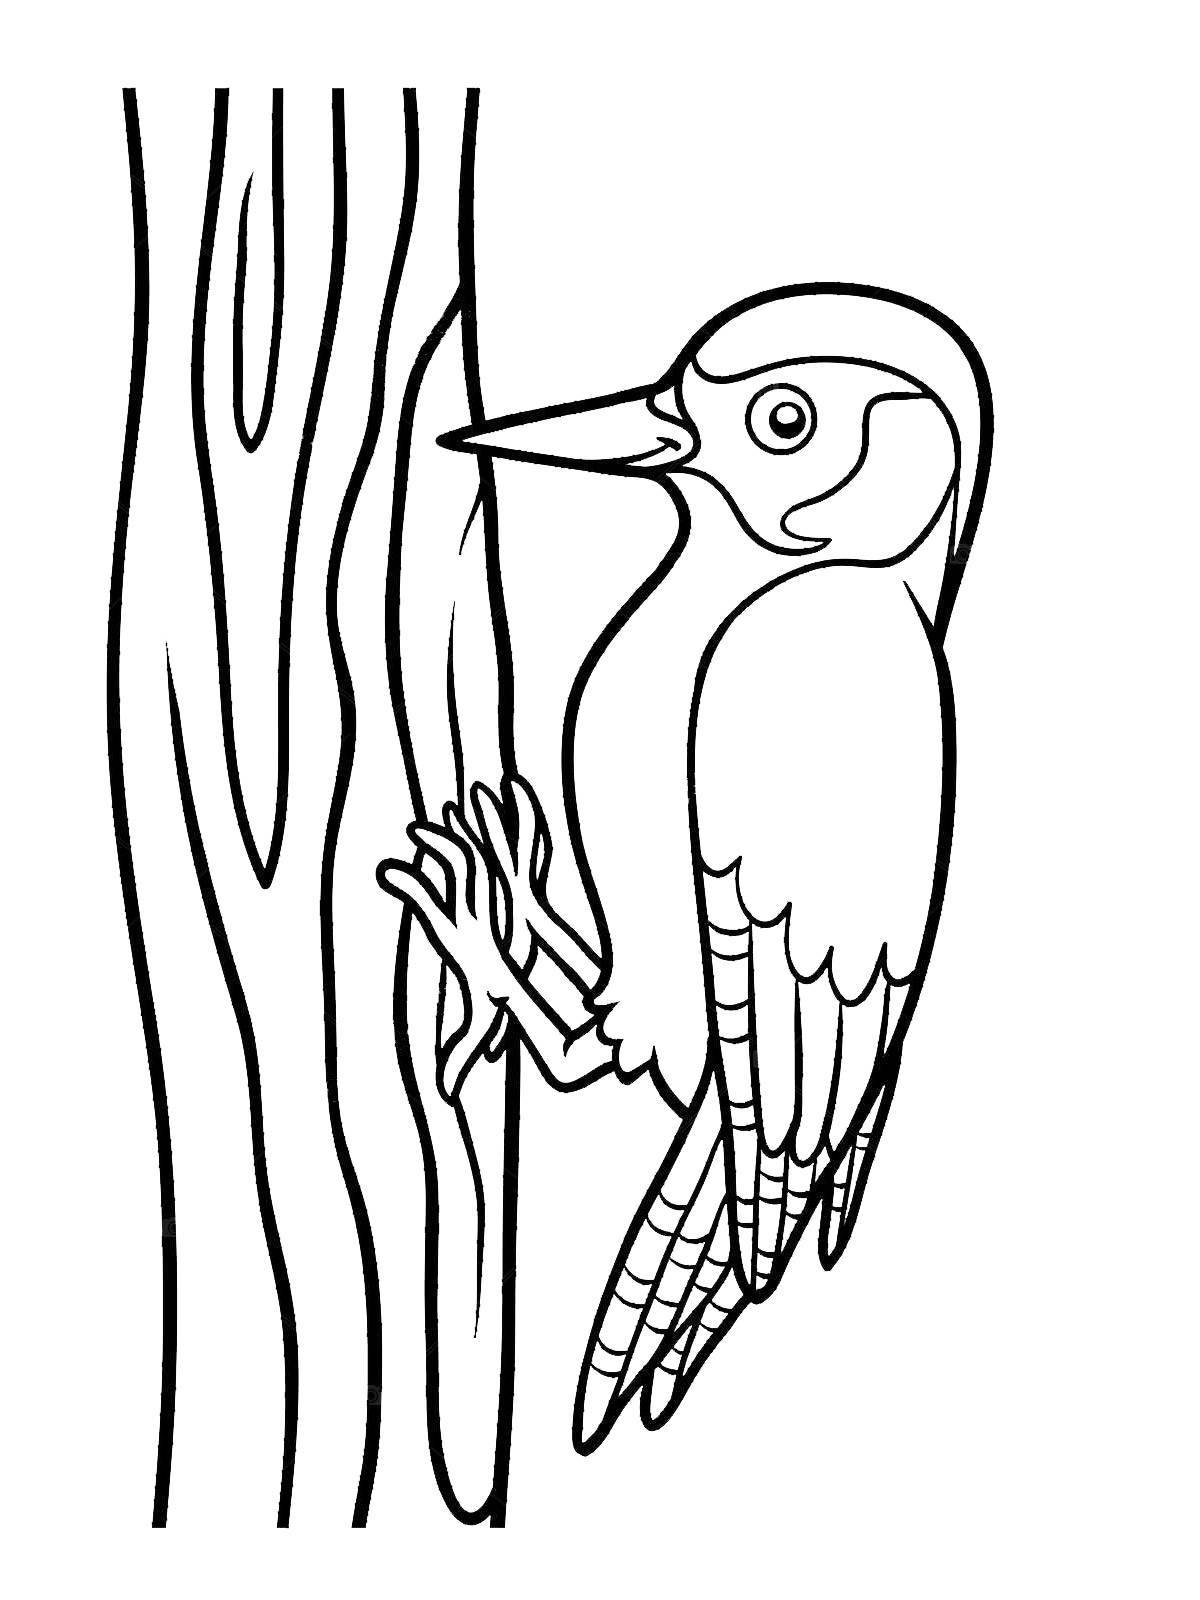 Children's woodpecker coloring book for kids